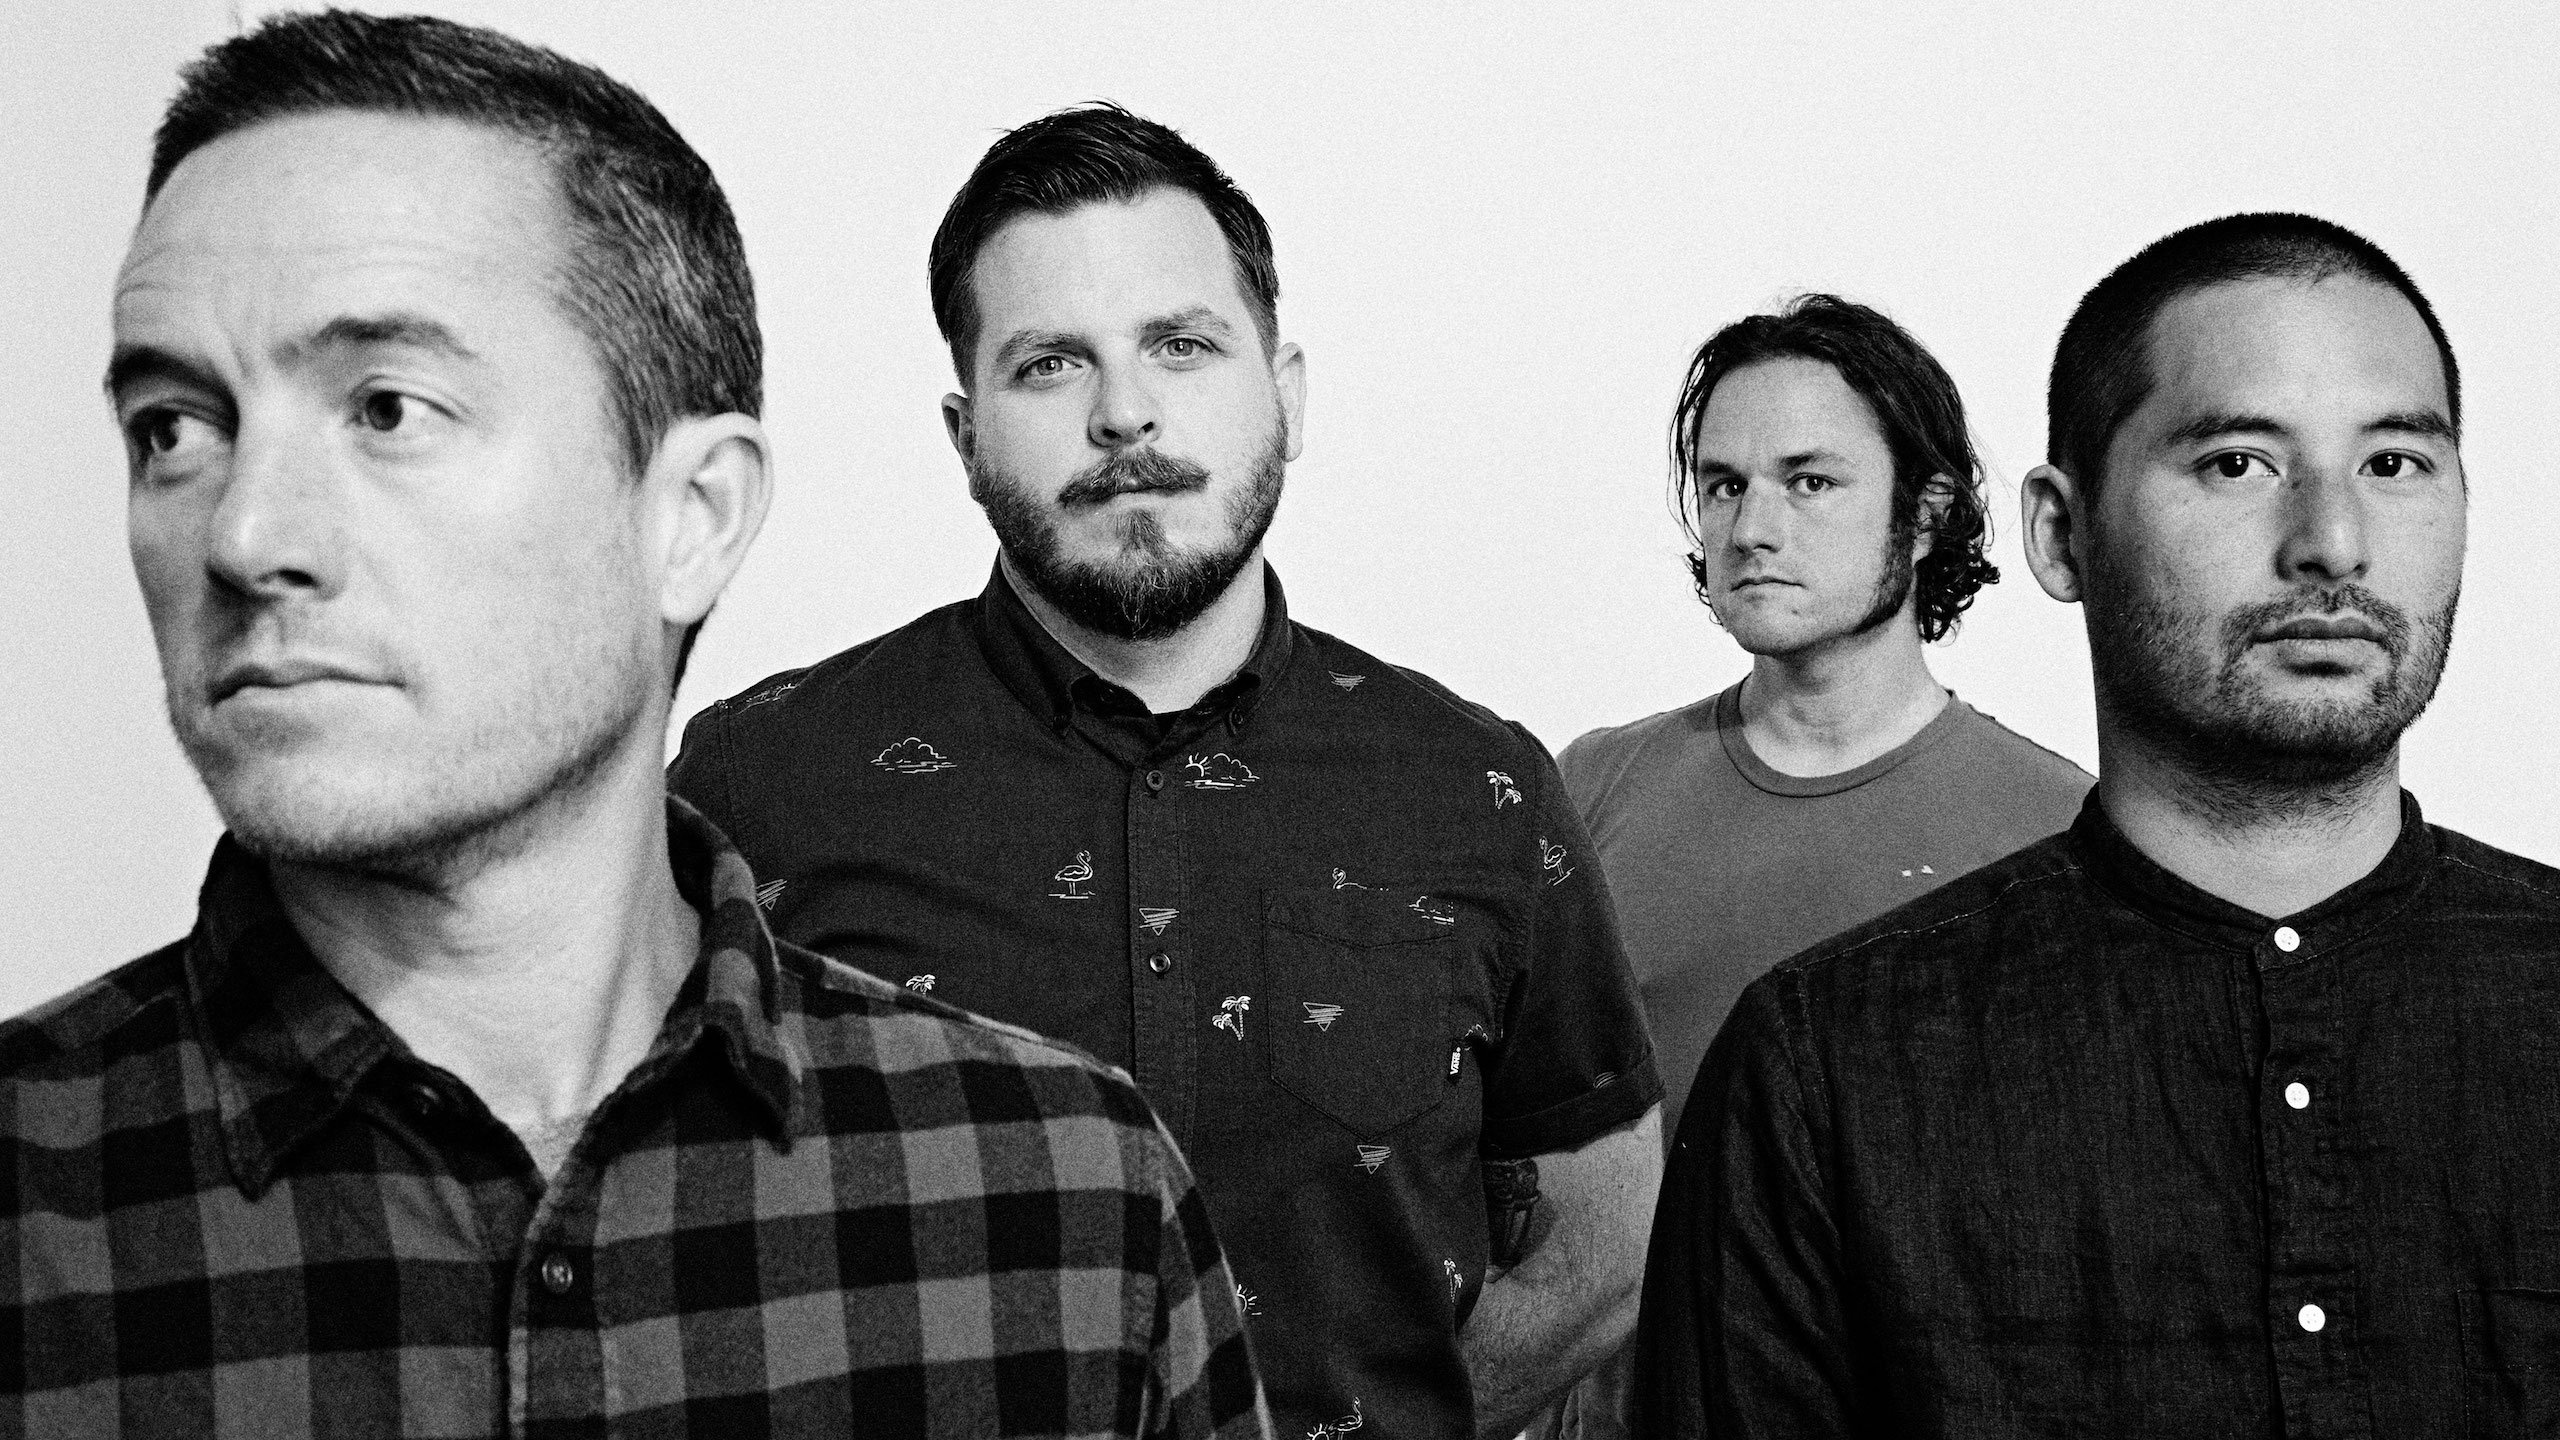 American rockers, Thrice 2019 tour, Indie music feeds, Live music experience, 2560x1440 HD Desktop